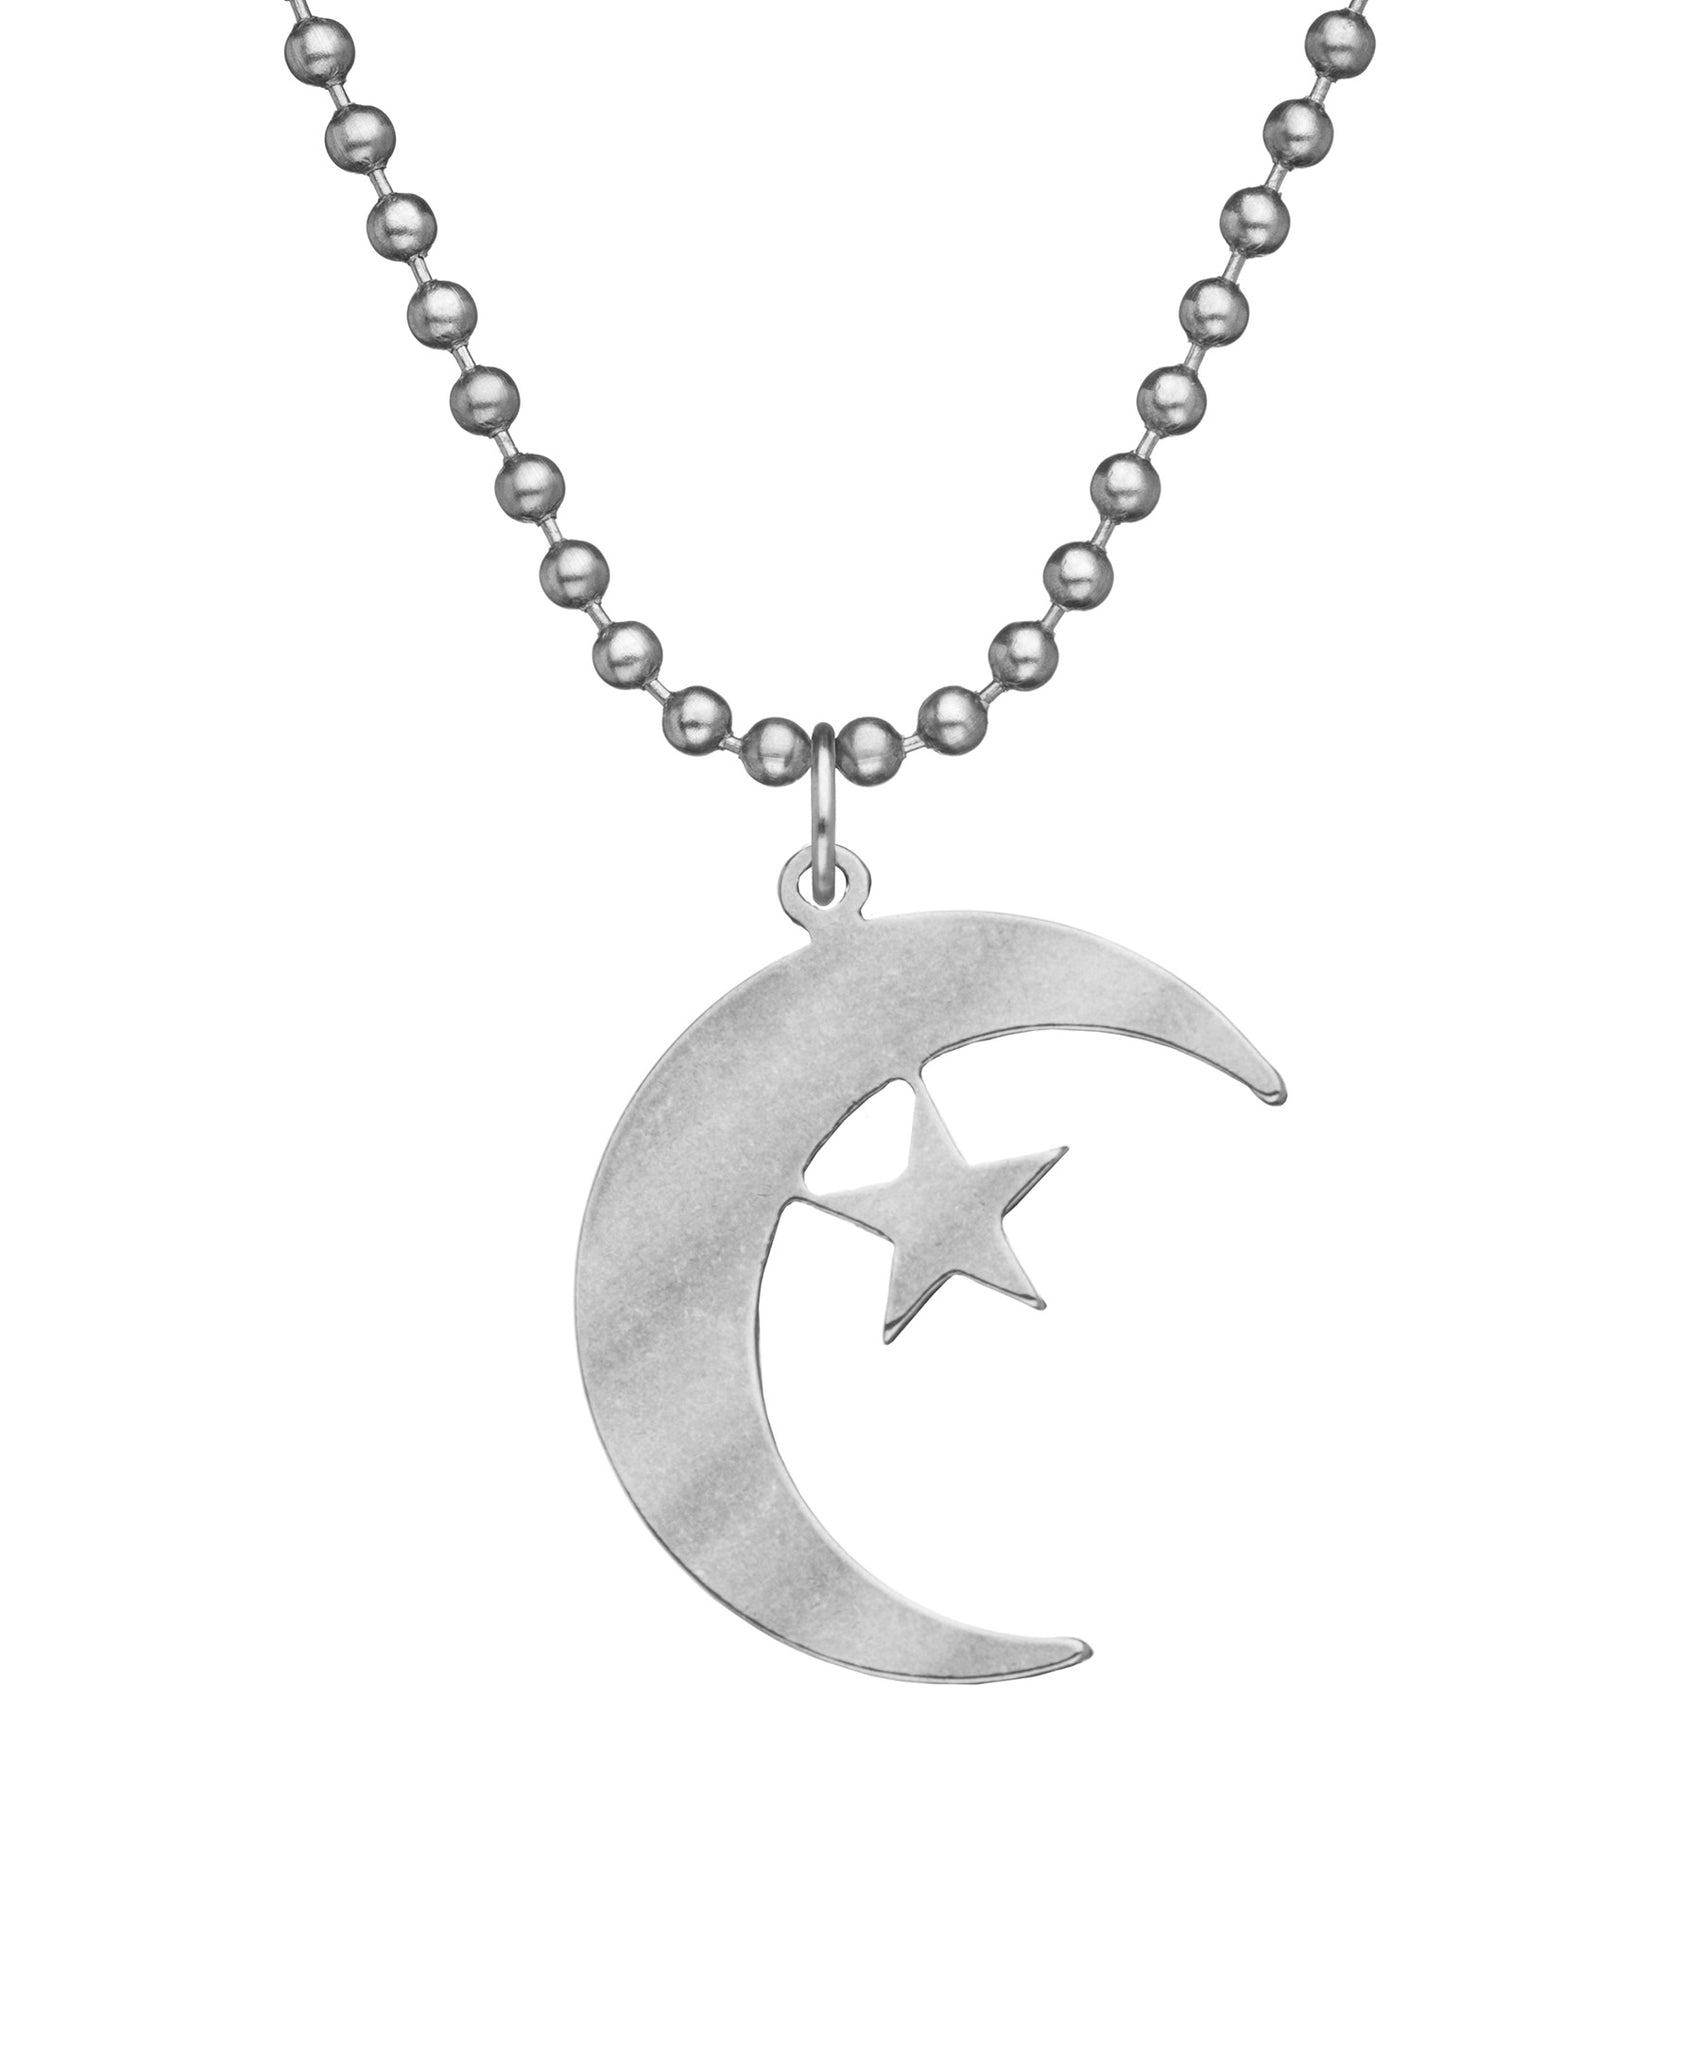 QUICK ORDER for Muslim Pendants: 2 Products